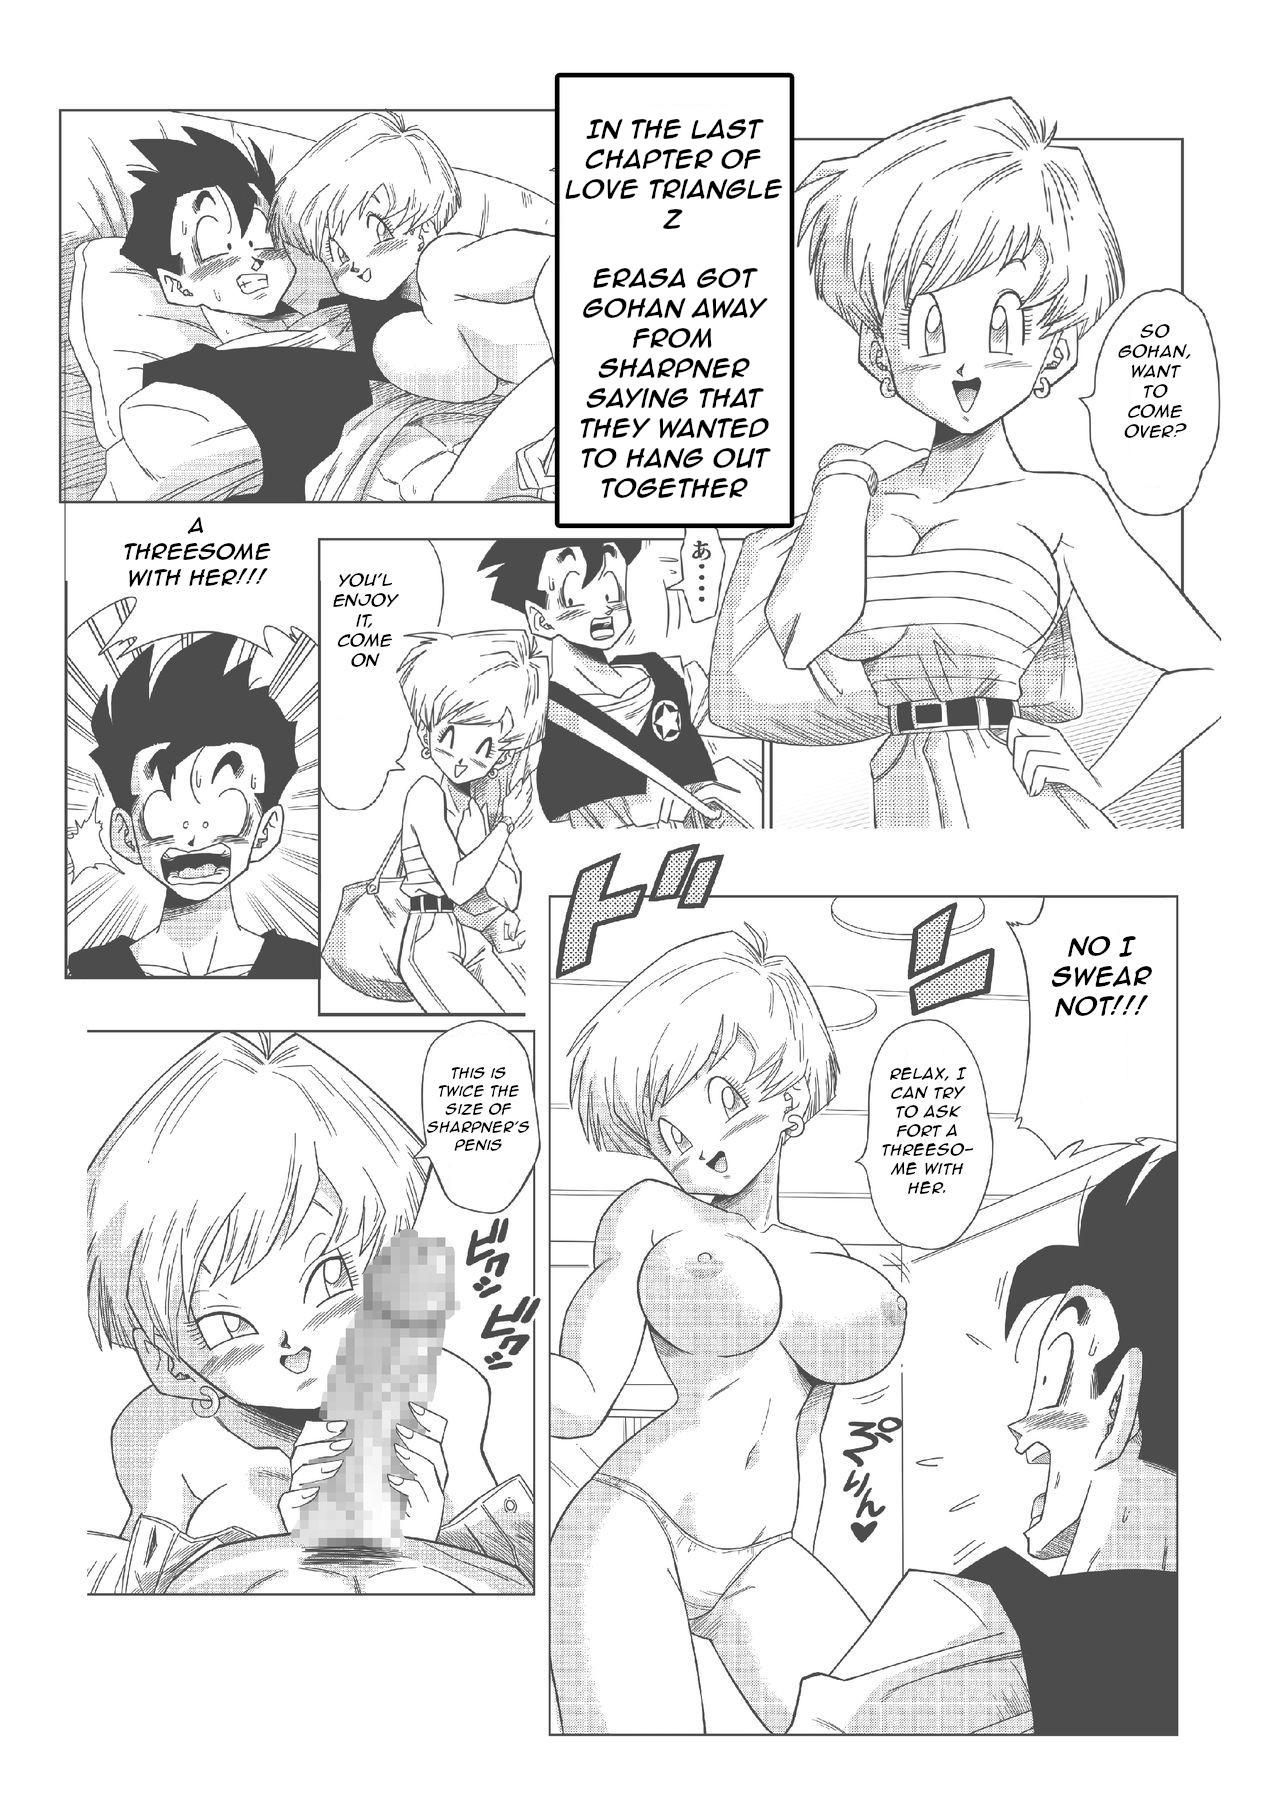 Hungarian Love Triangle Z part 2 - Dragon ball z Moms - Picture 2